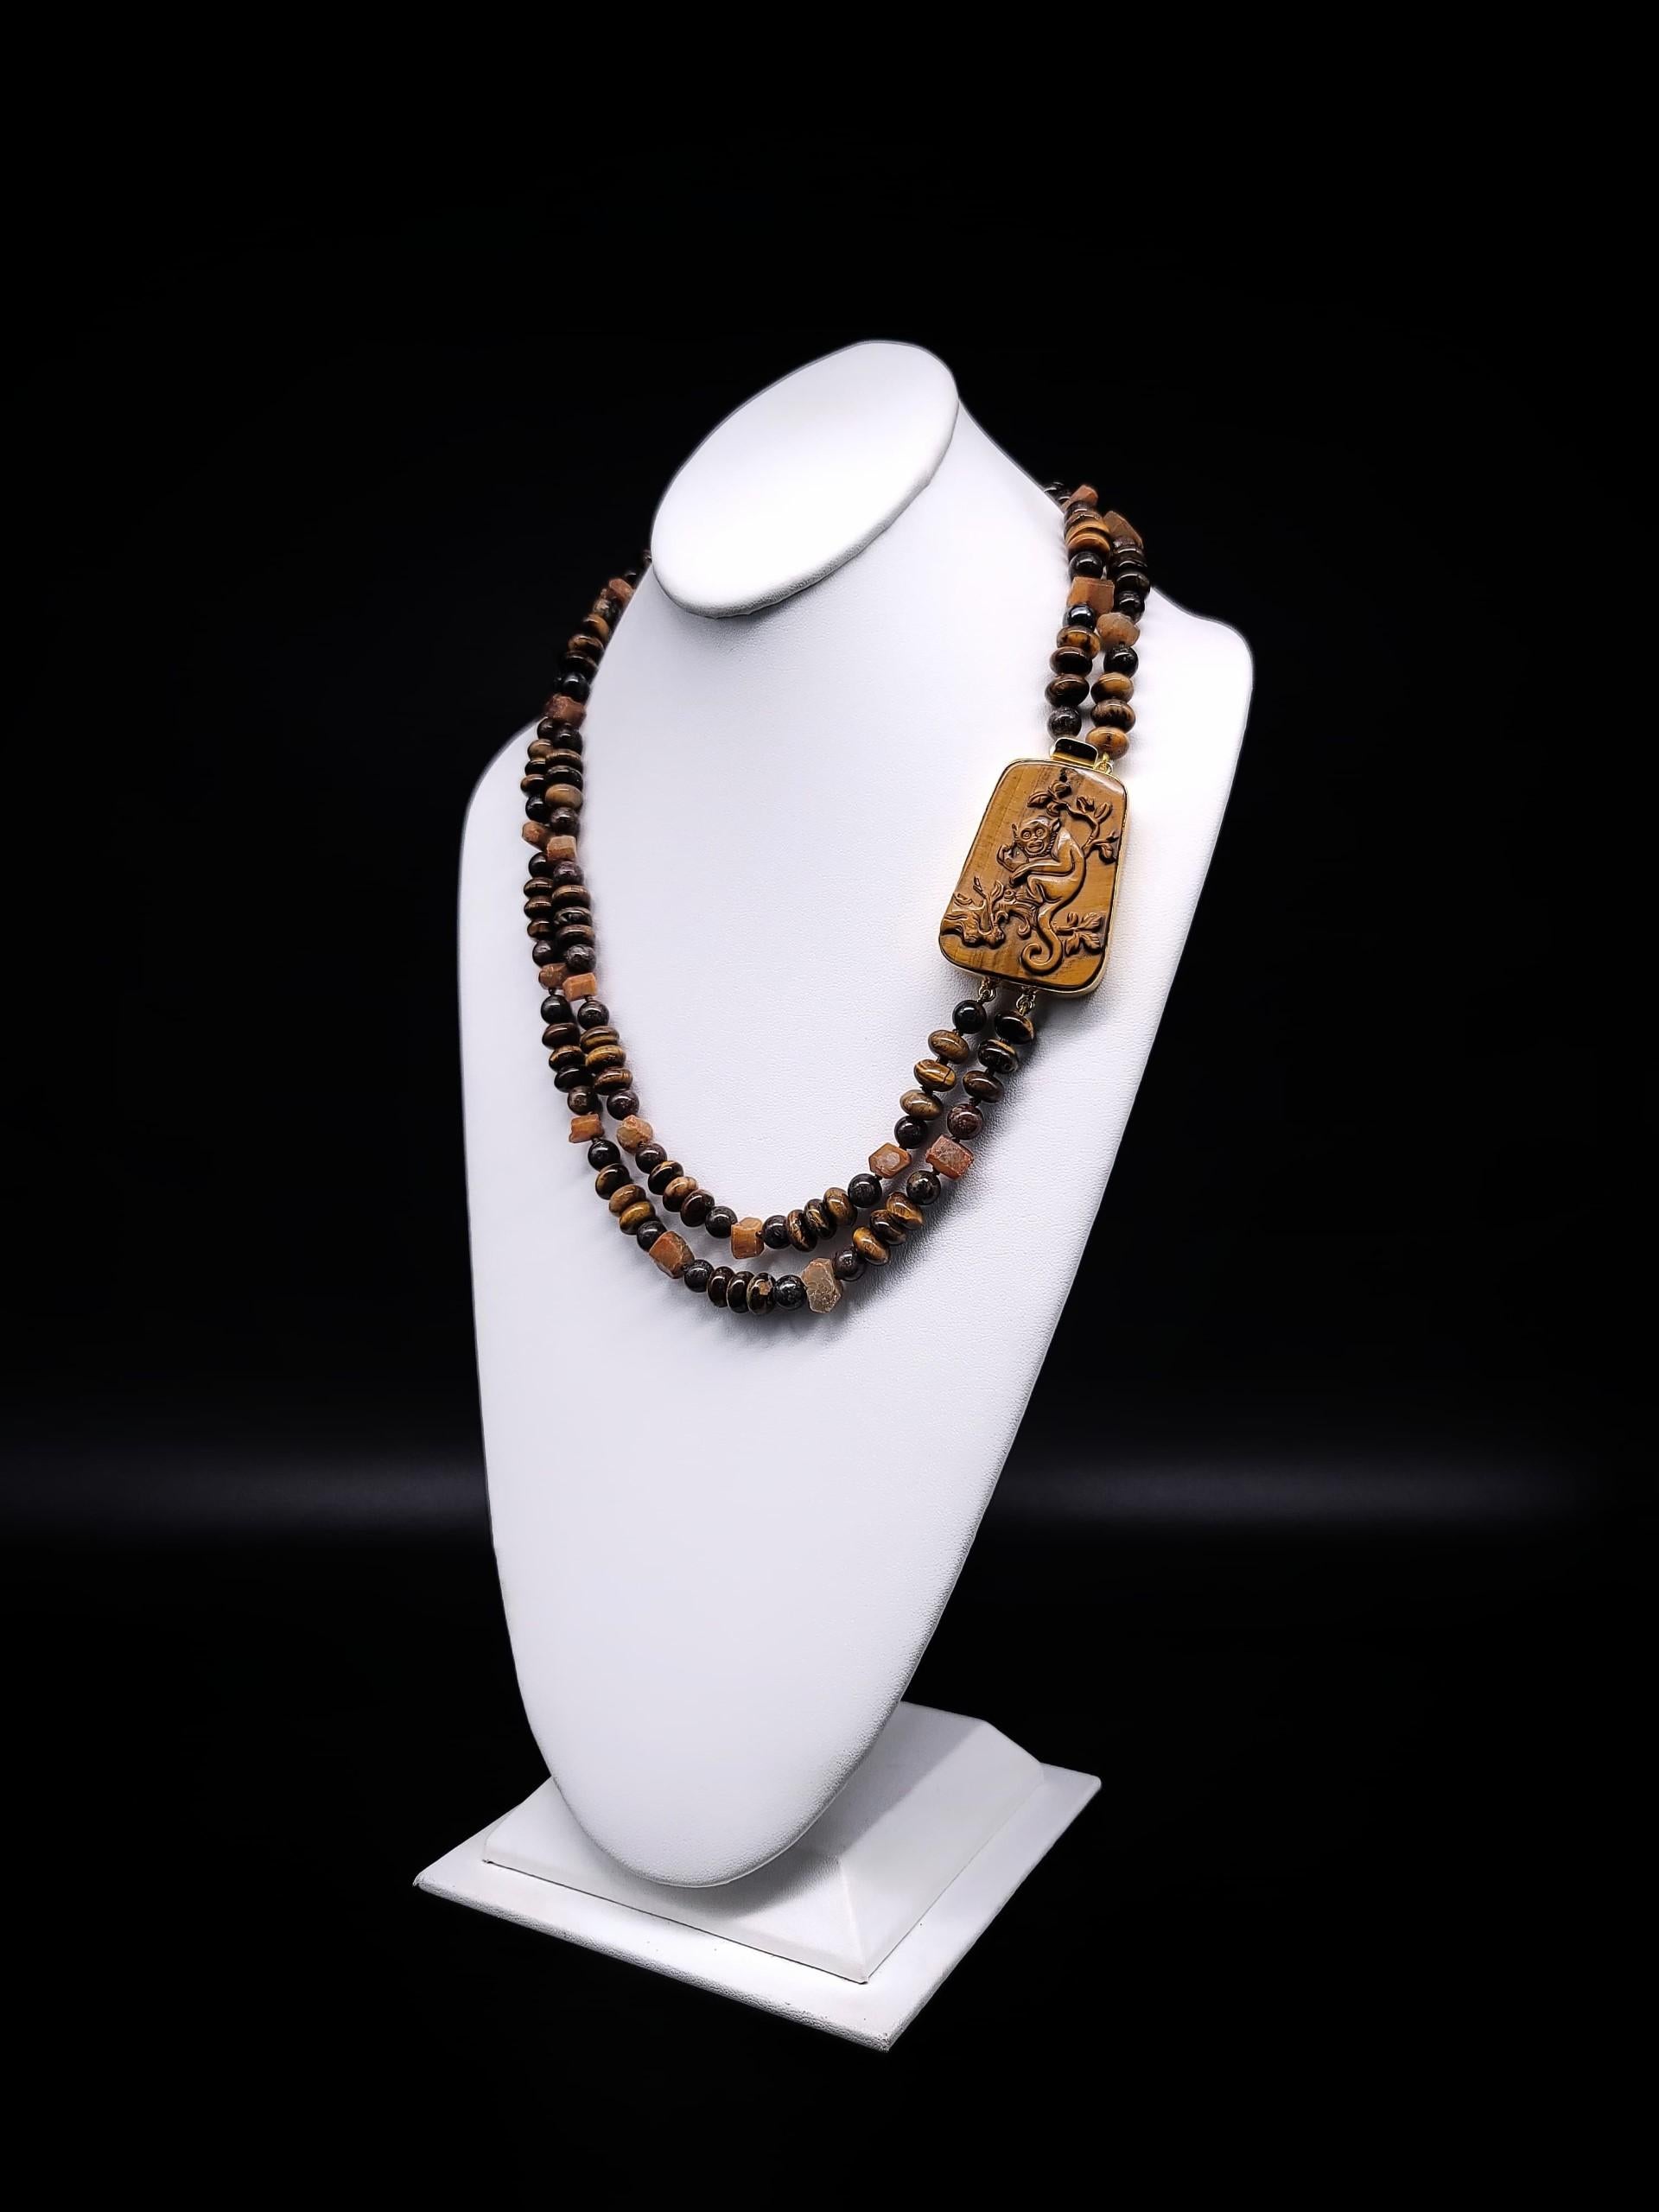 Elevate your style with this truly exceptional One-of-a-Kind two-strand necklace, featuring a harmonious blend of Tiger's Eye and exquisite yellow Madagascar Sapphires. What sets this piece apart is not just its stunning gemstones but also the